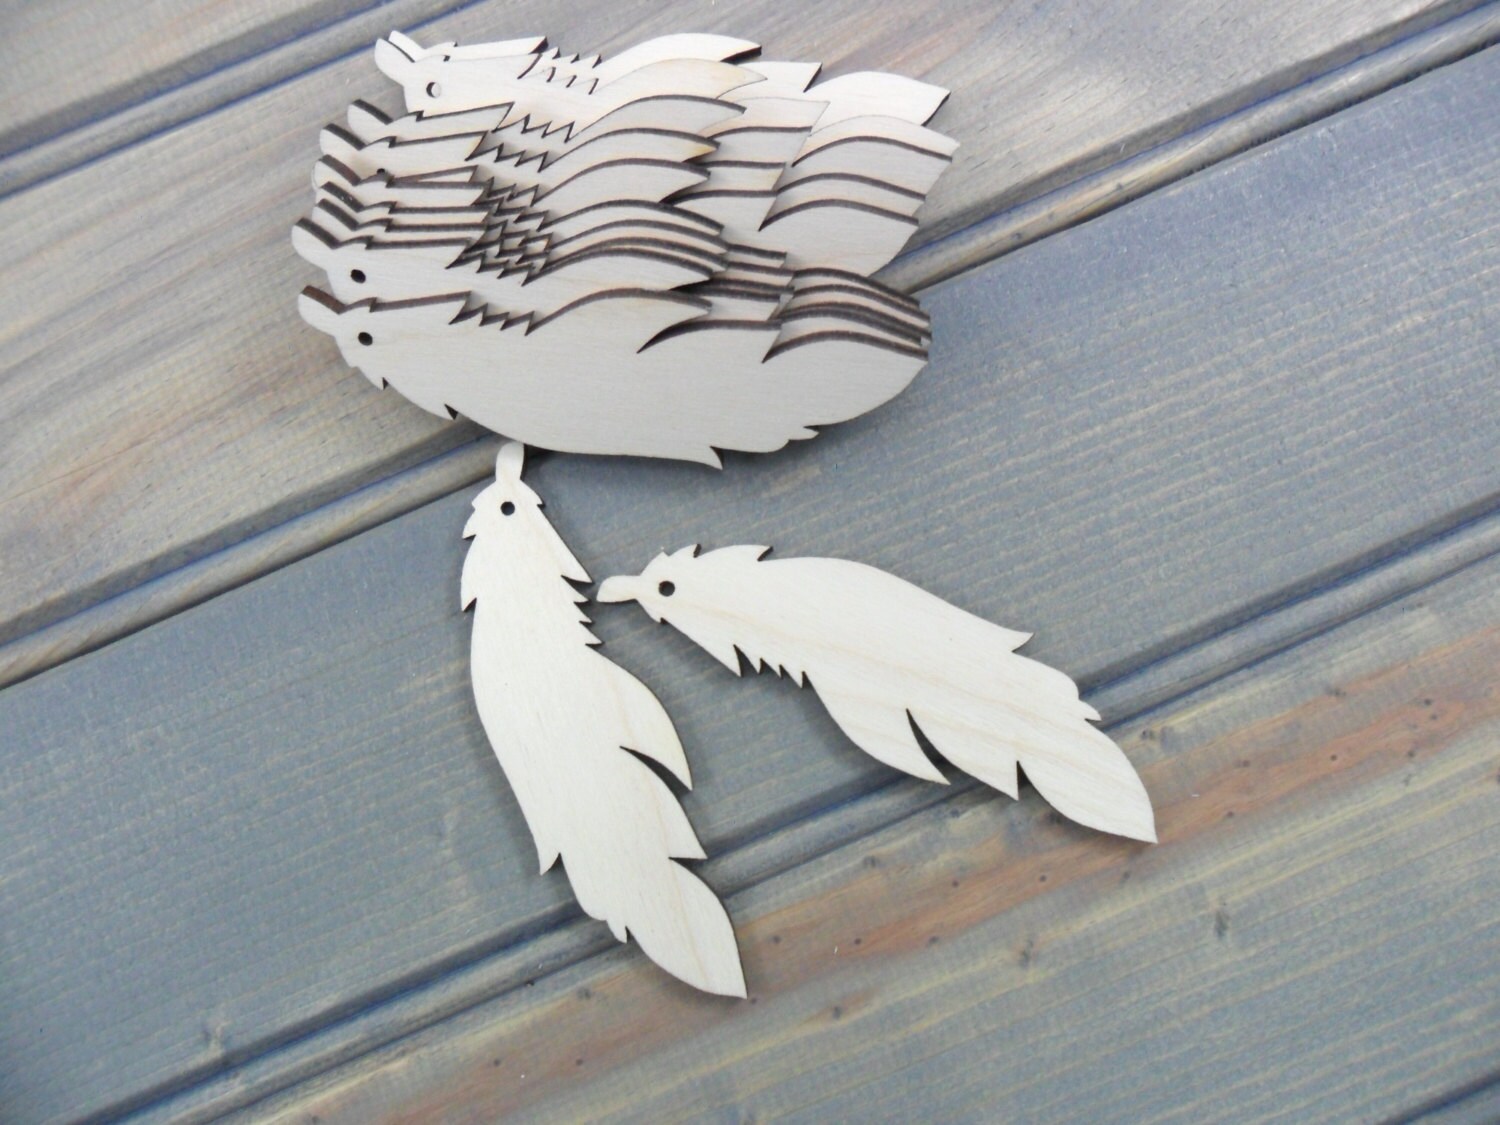 Wood jewelry blanks. Plywood Blank cutouts Feather shape unfinished wood slice Unfinished wooden earrings blanks Feather wood cut out